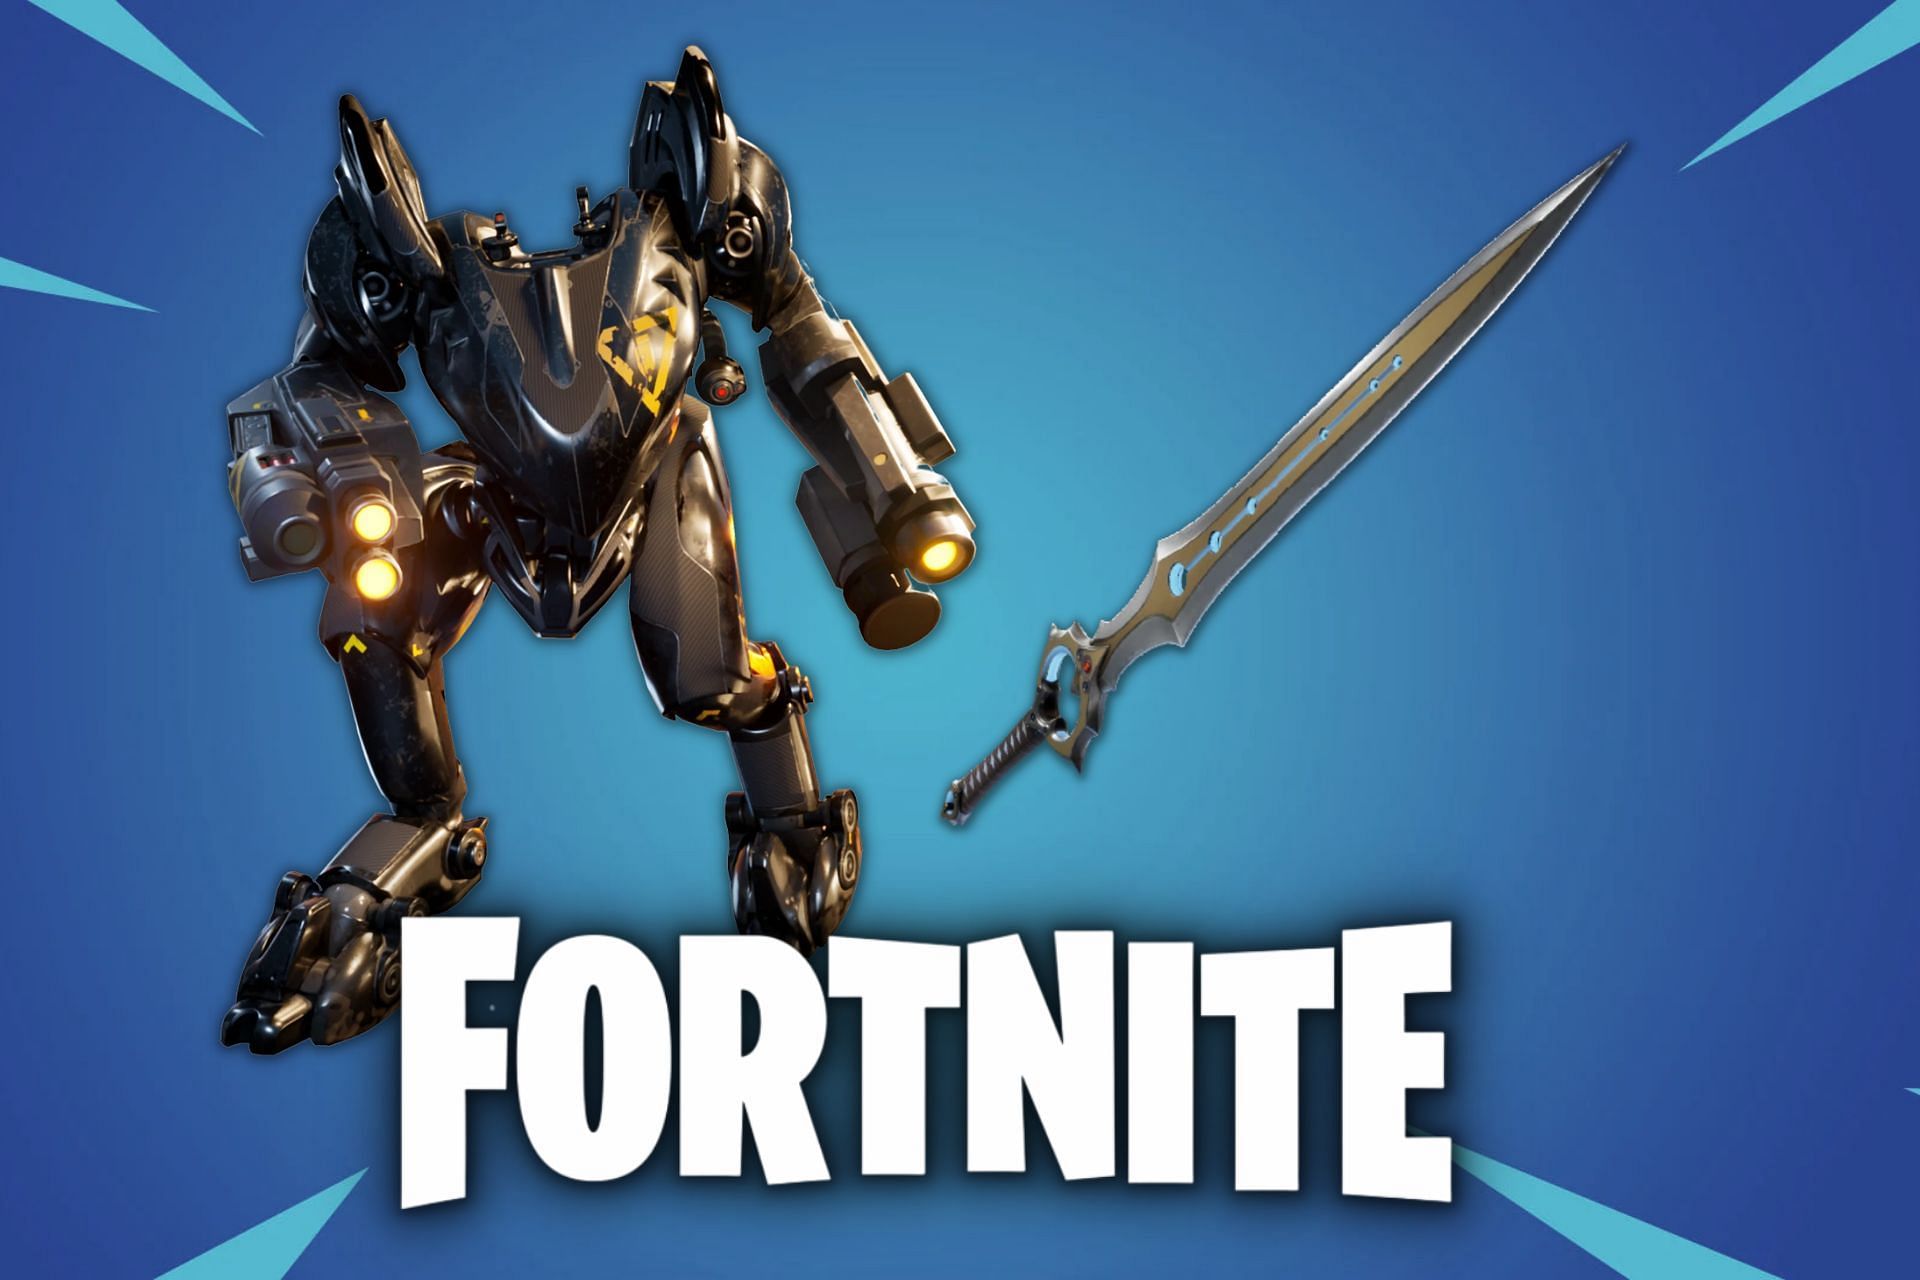 Fortnite players will be wondering which dangerously overpowered item, the B.R.U.T.E mech, or the Infinity Blade will be coming back to the game soon (Image via Sportskeeda)